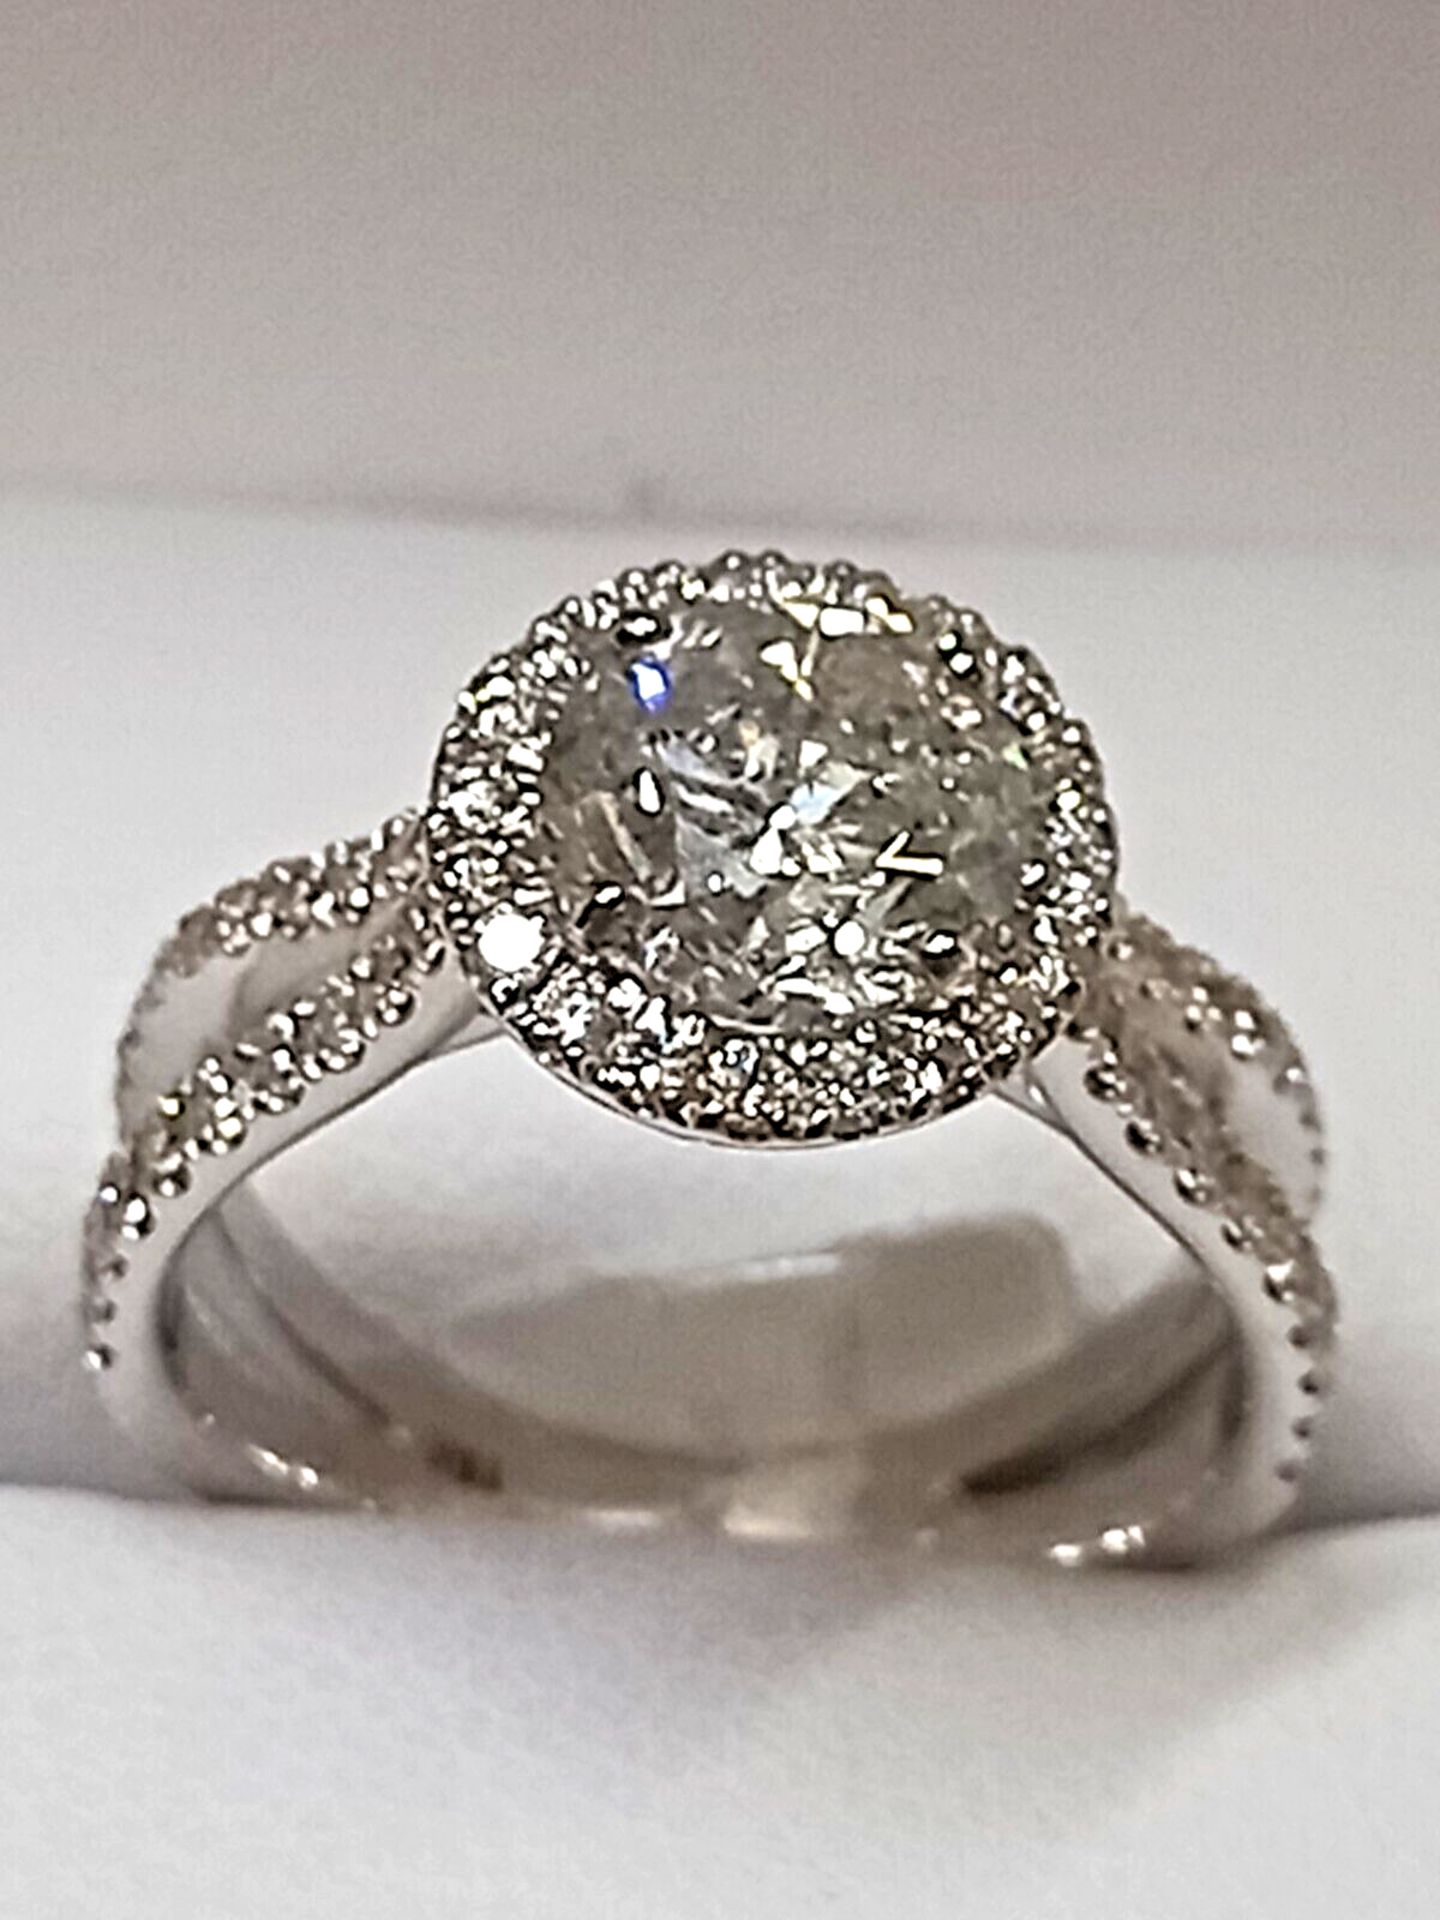 2.20CT HALO SET DIAMOND ENGAGEMENT RING/18CT WHITE GOLD + GIFT BOX + VALUATION CERT OF £7995 - Image 2 of 7